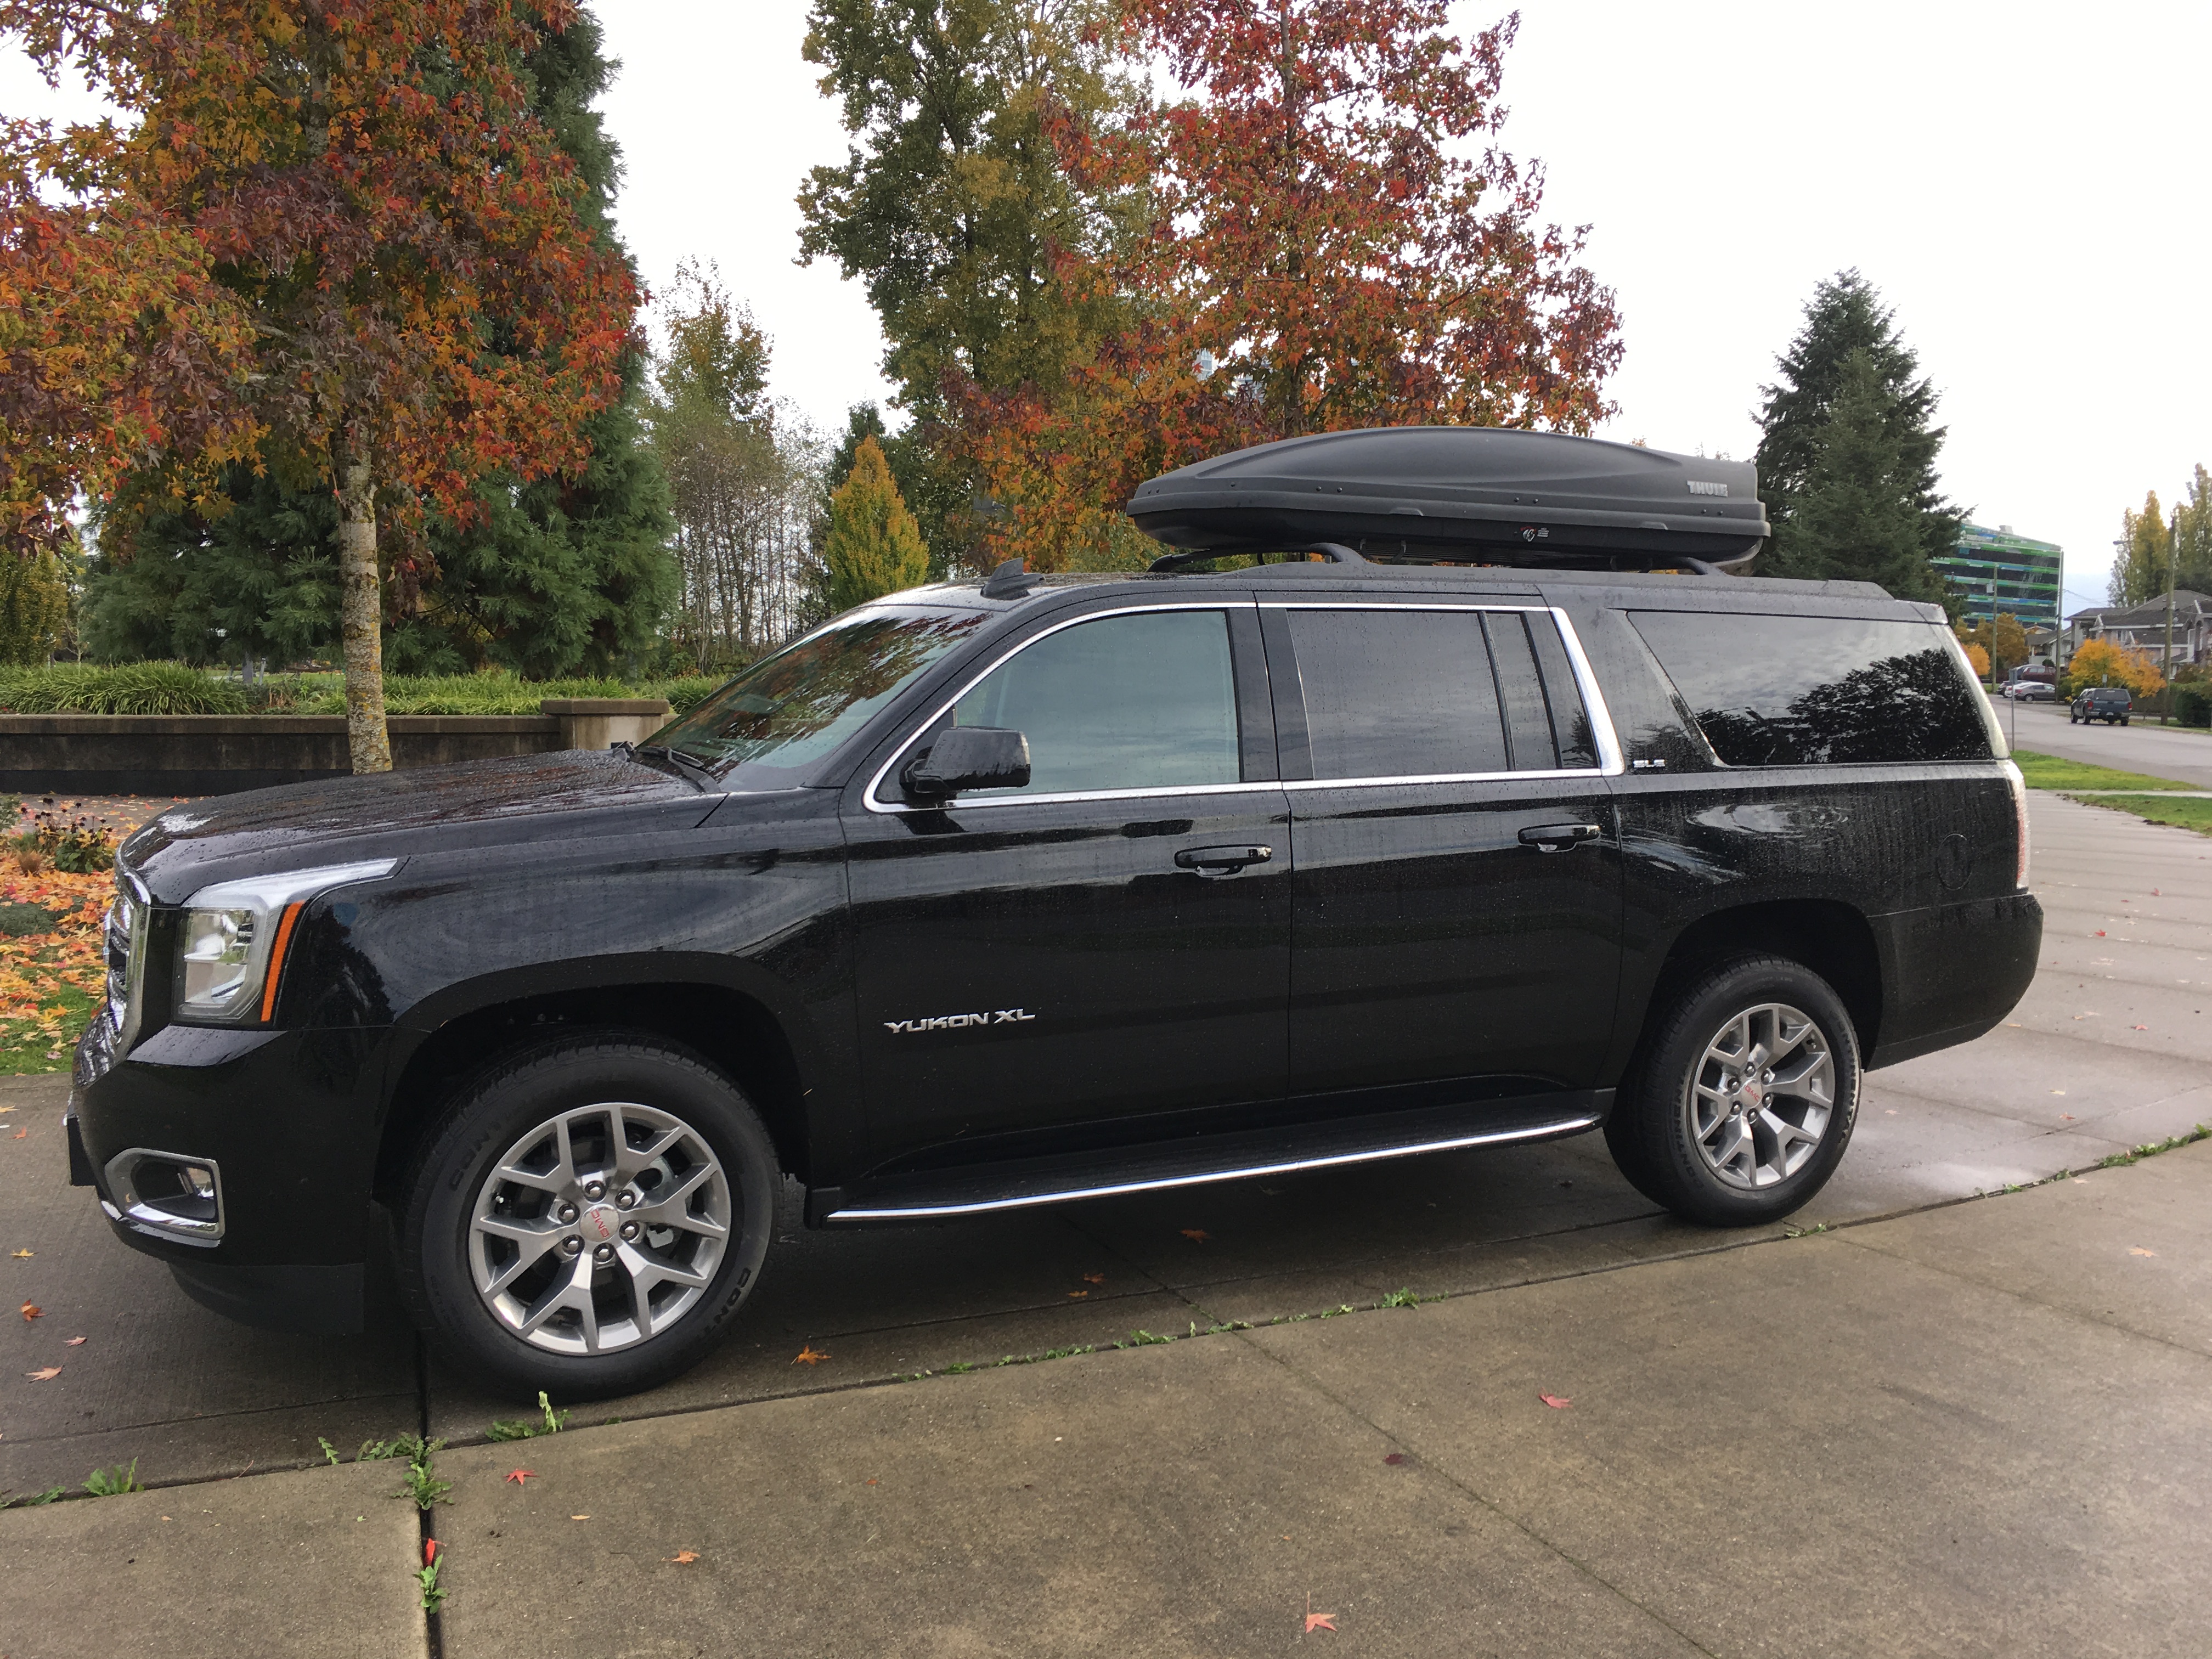 Riding in Style: Luxurious Facilities Offered by Corporate Limo Services